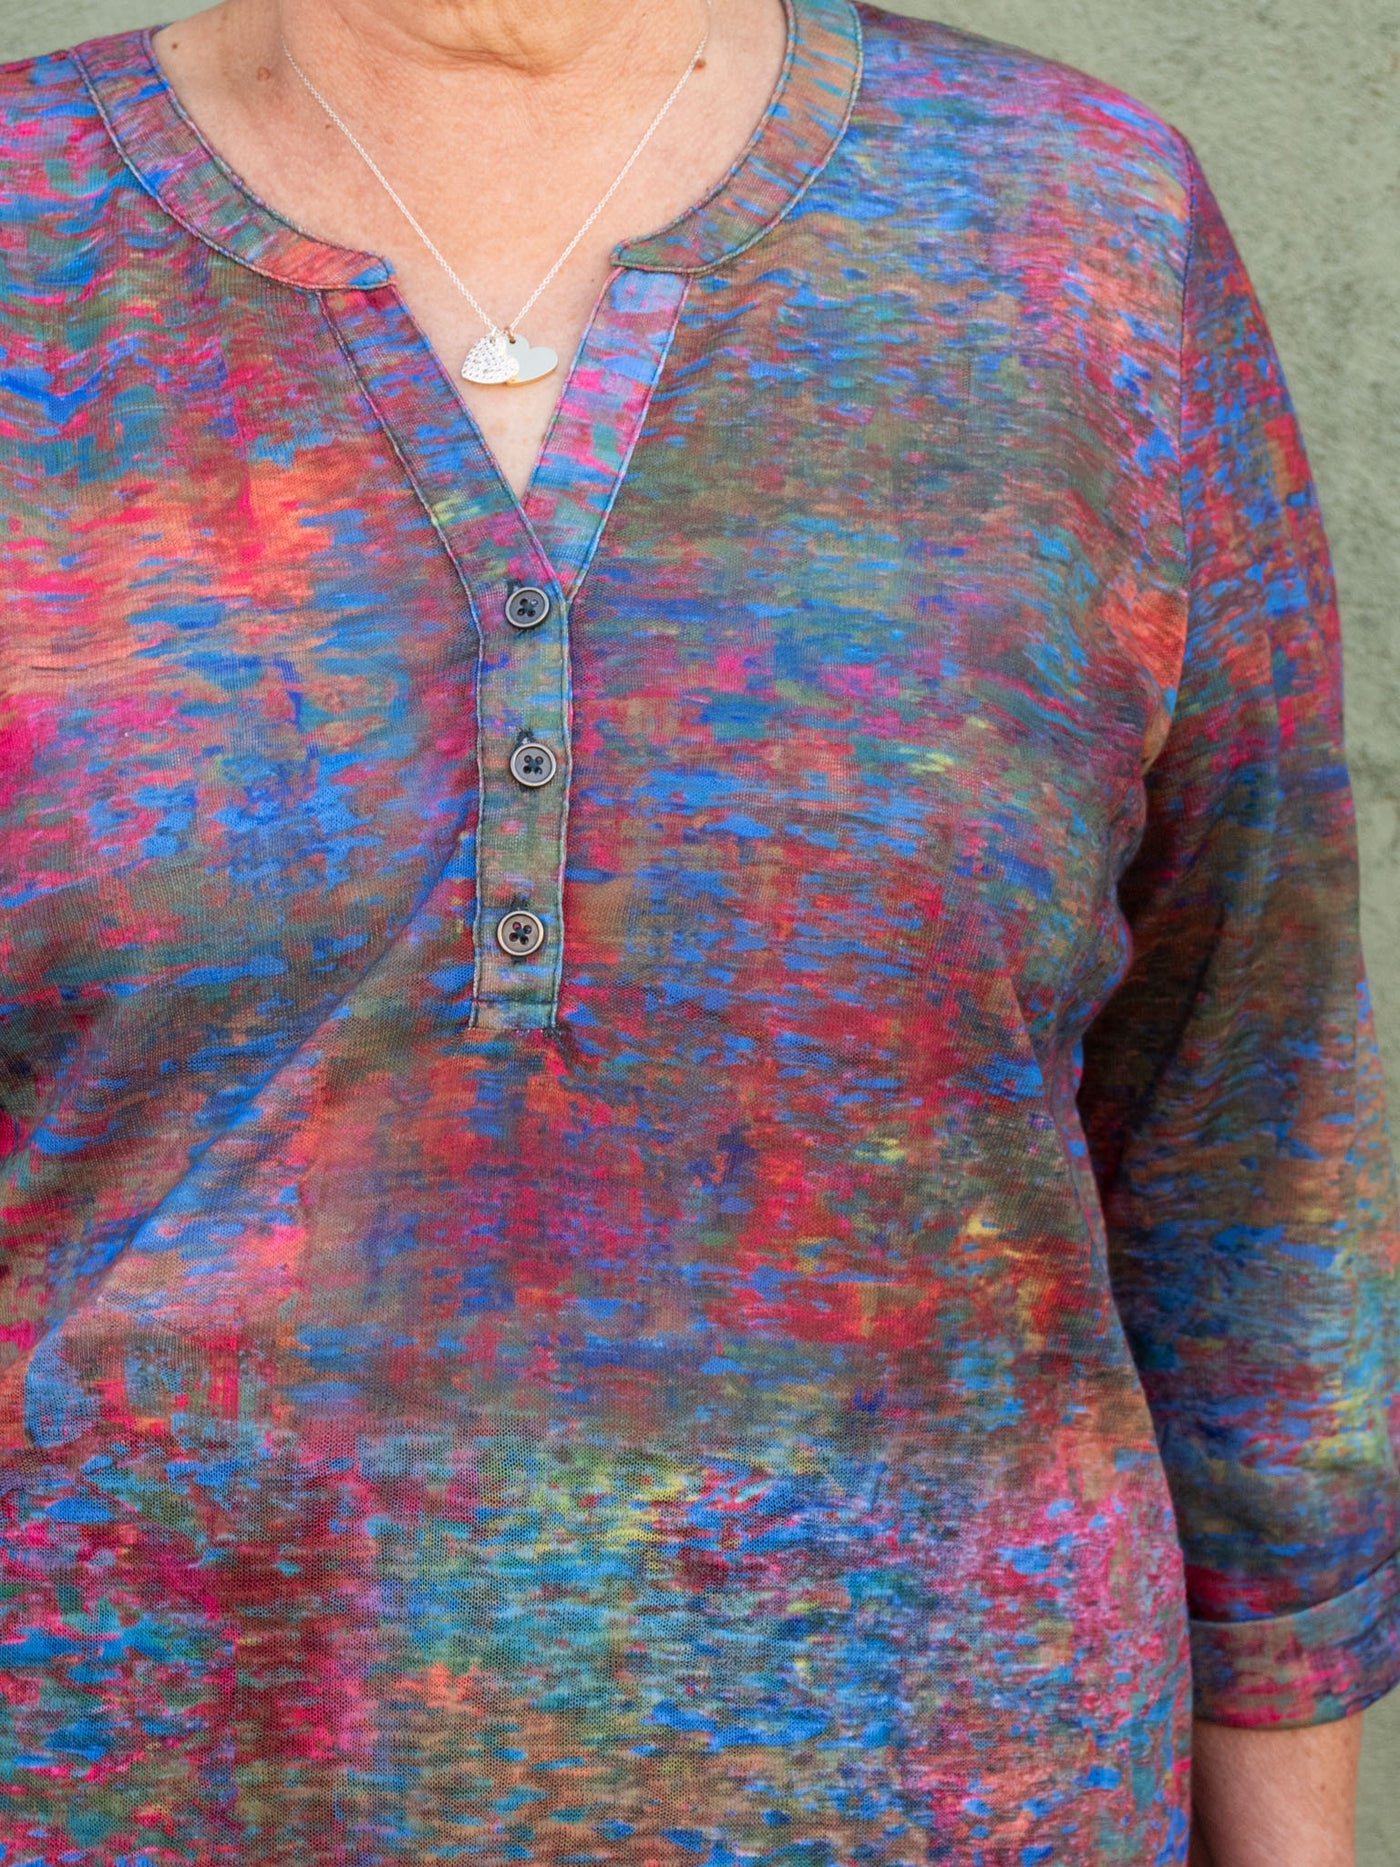 A model wearing a multicolored top with a button collar detail and 3/4 length sleeves. The model has it paired with a pair of medium wash jeans.